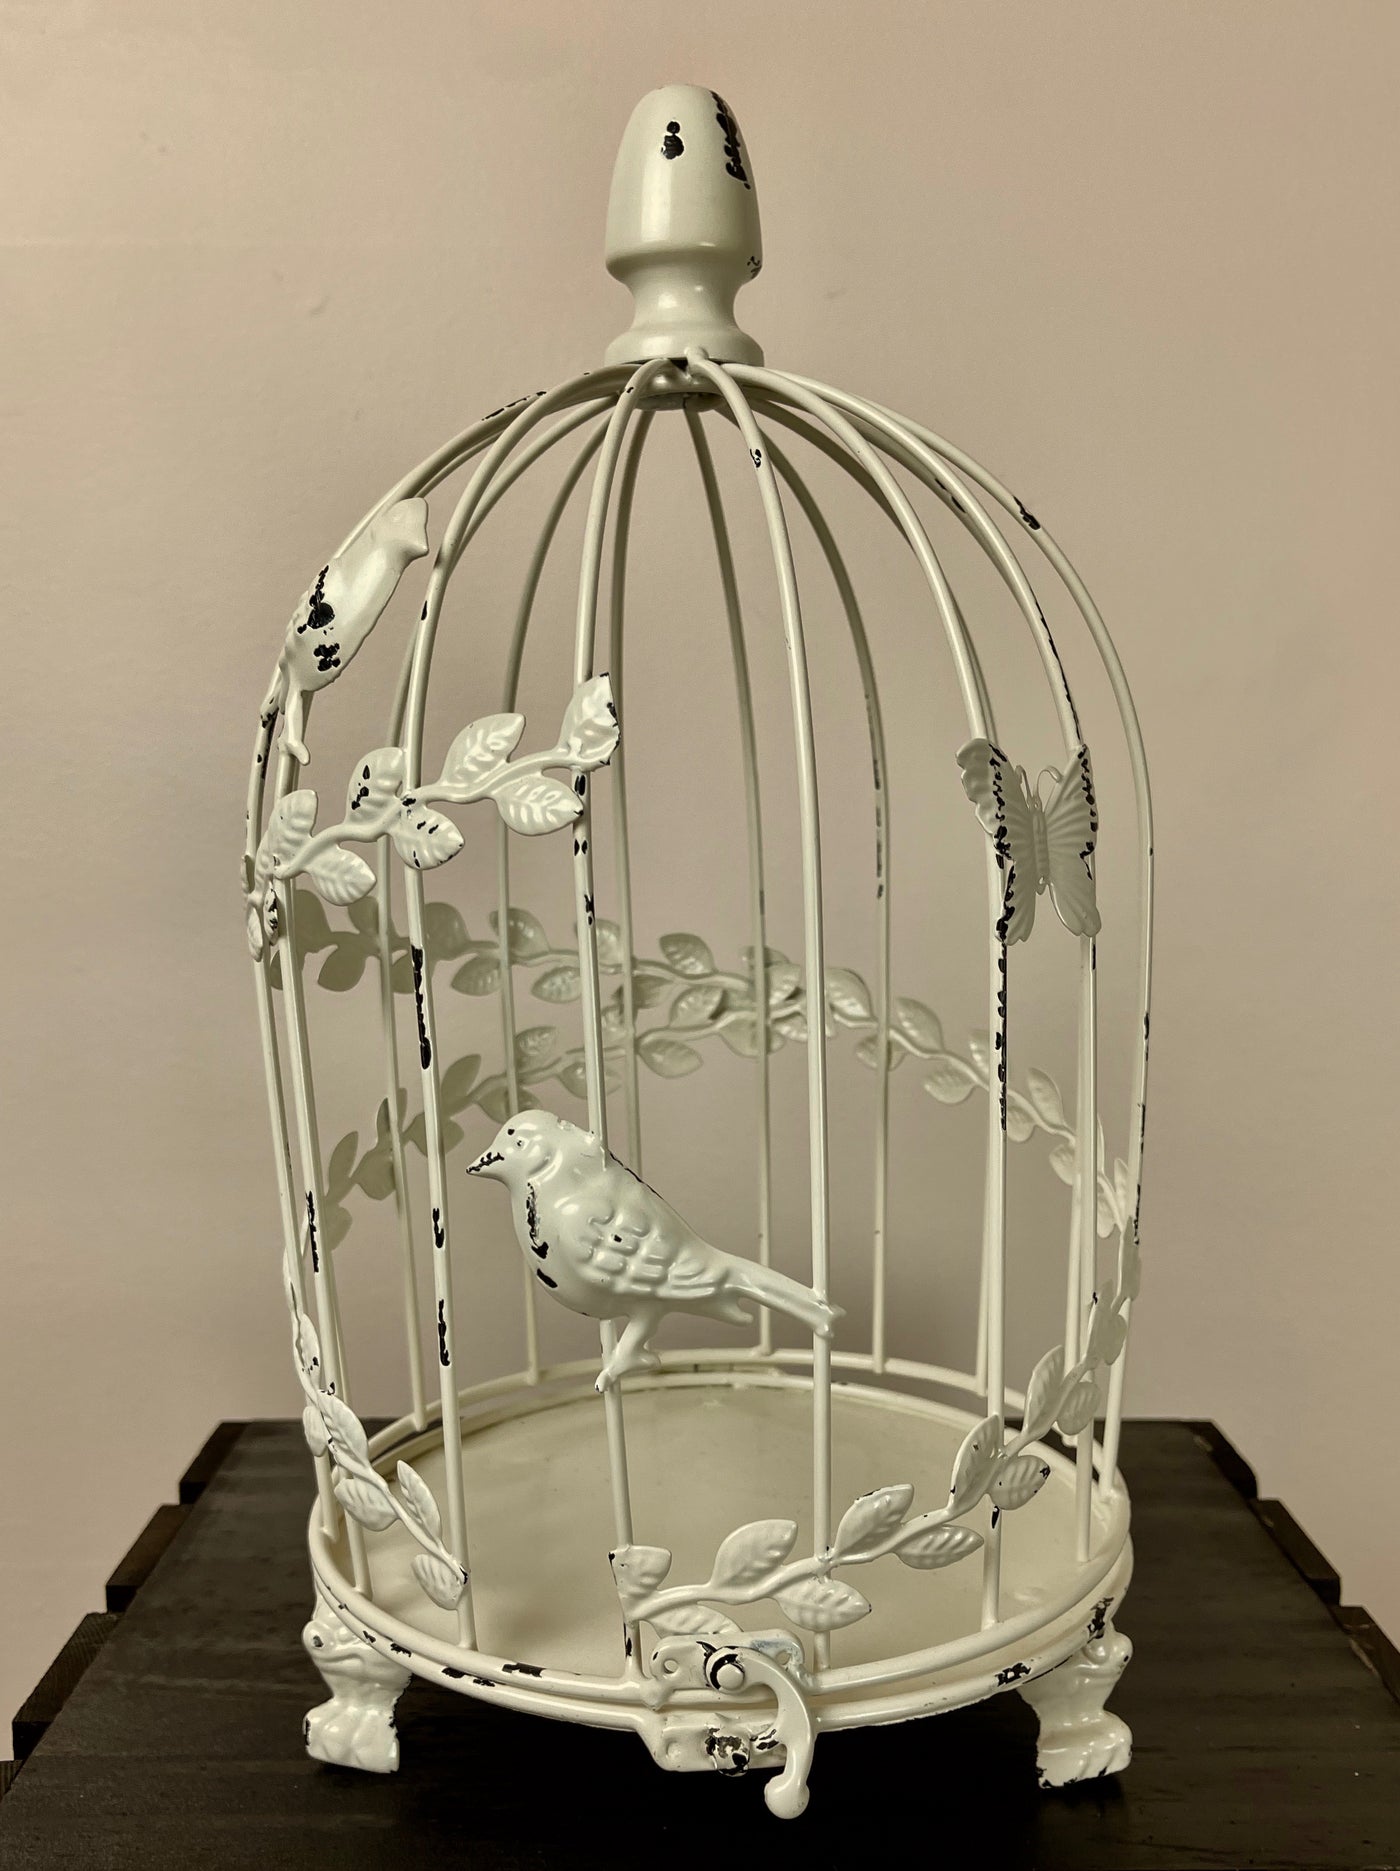 Rent a Rose- 14 inch tall cream distressed birdcage to be used as a decor element. Flowers can be added inside cage